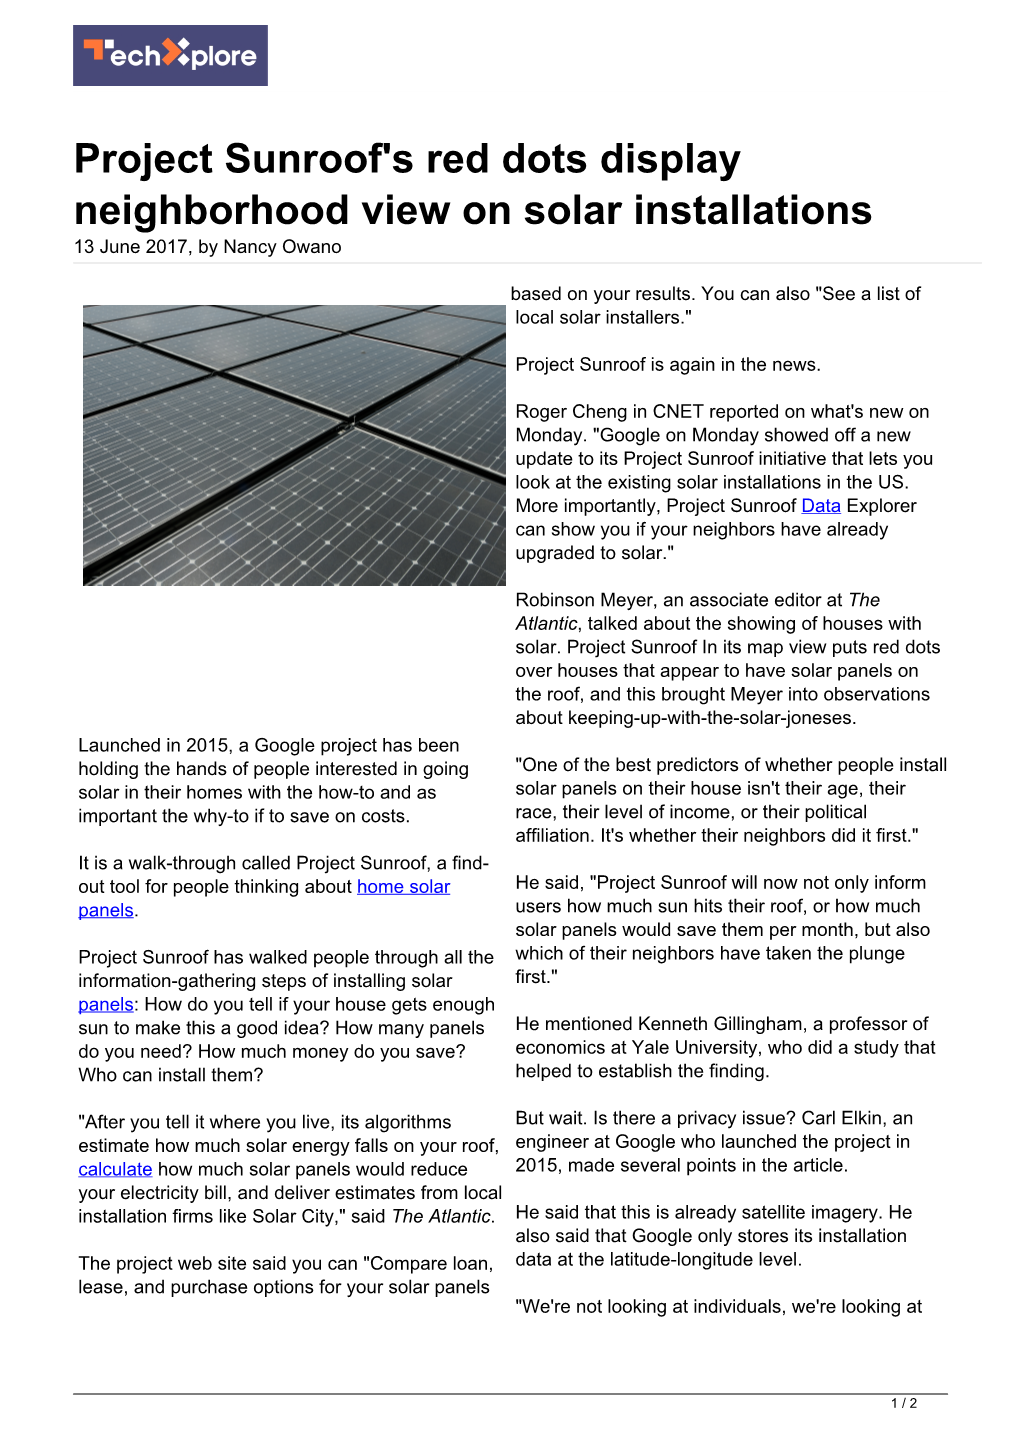 Project Sunroof's Red Dots Display Neighborhood View on Solar Installations 13 June 2017, by Nancy Owano